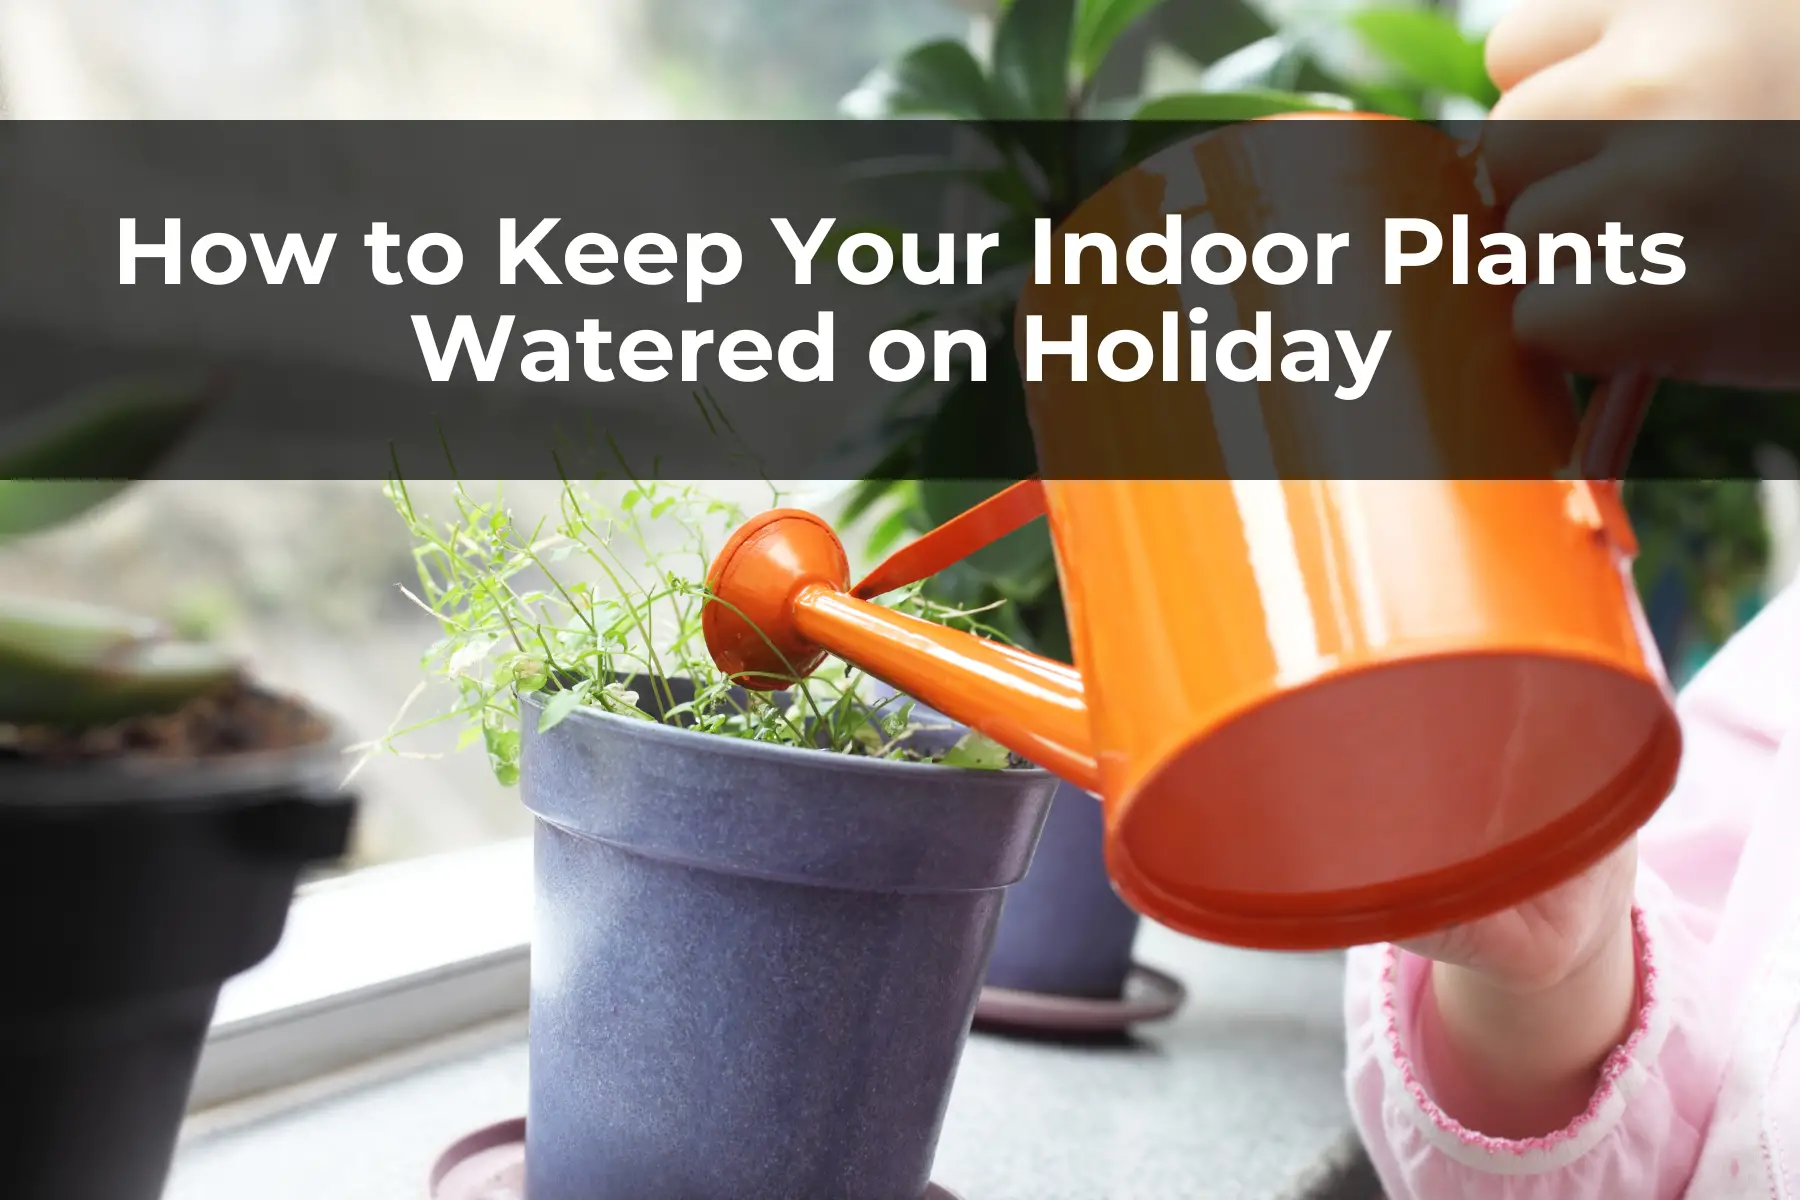 How to Keep Your Indoor Plants Watered on Holiday